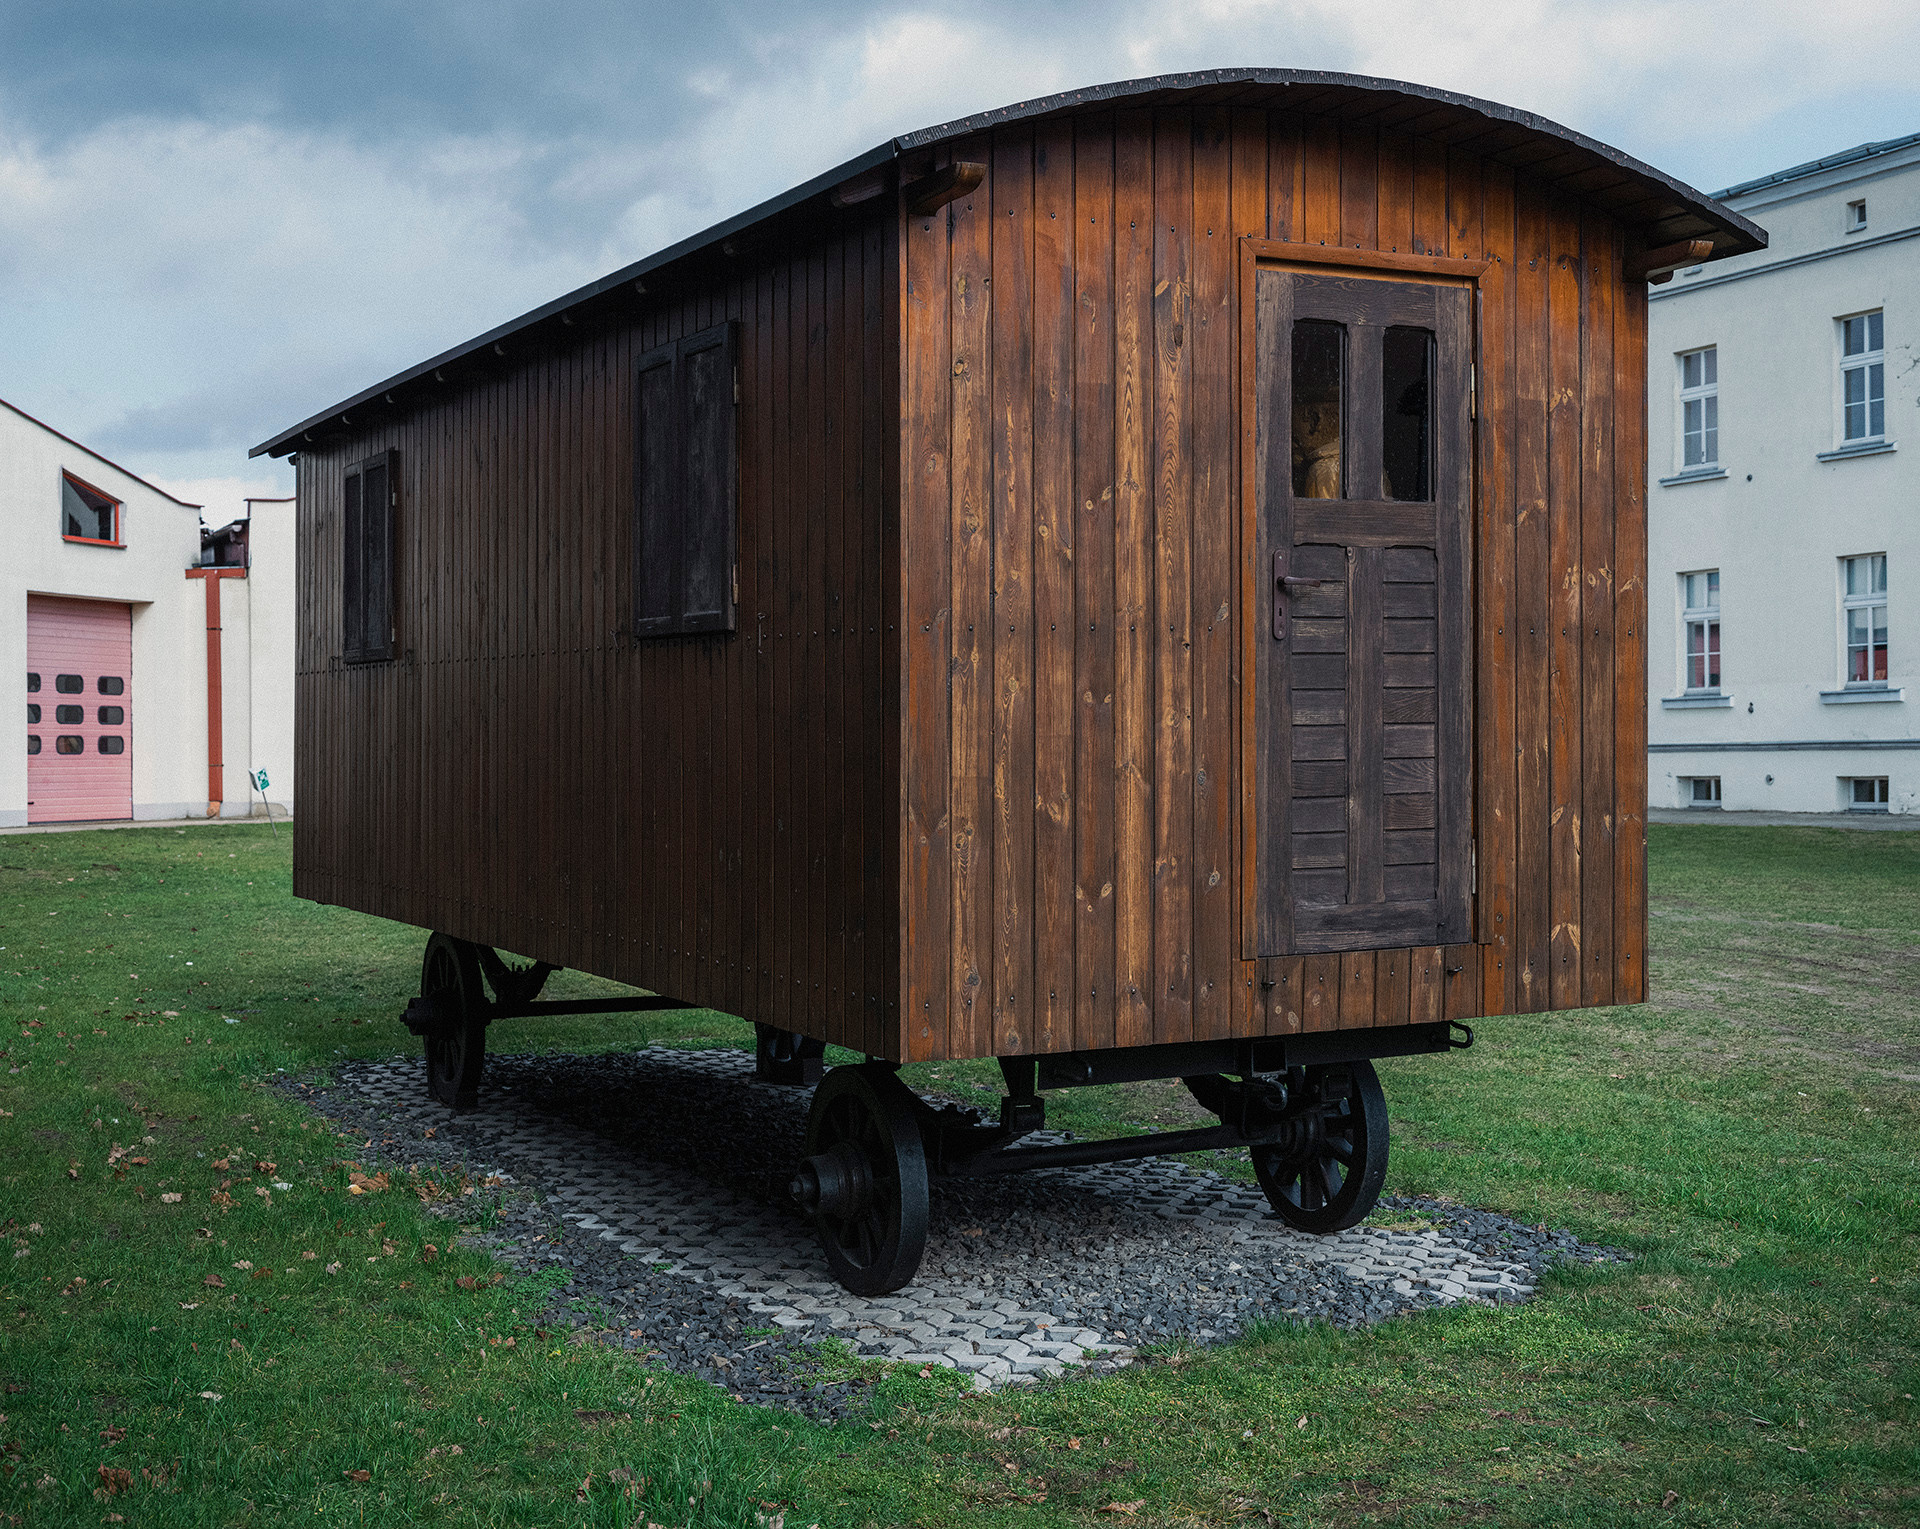 A contemporary replica of farmer Michał Drzymała’s wagon that he used as a temporary performative home to resist the discriminatory German Settlement law in the early 20th century; Rakoniewice, Poland